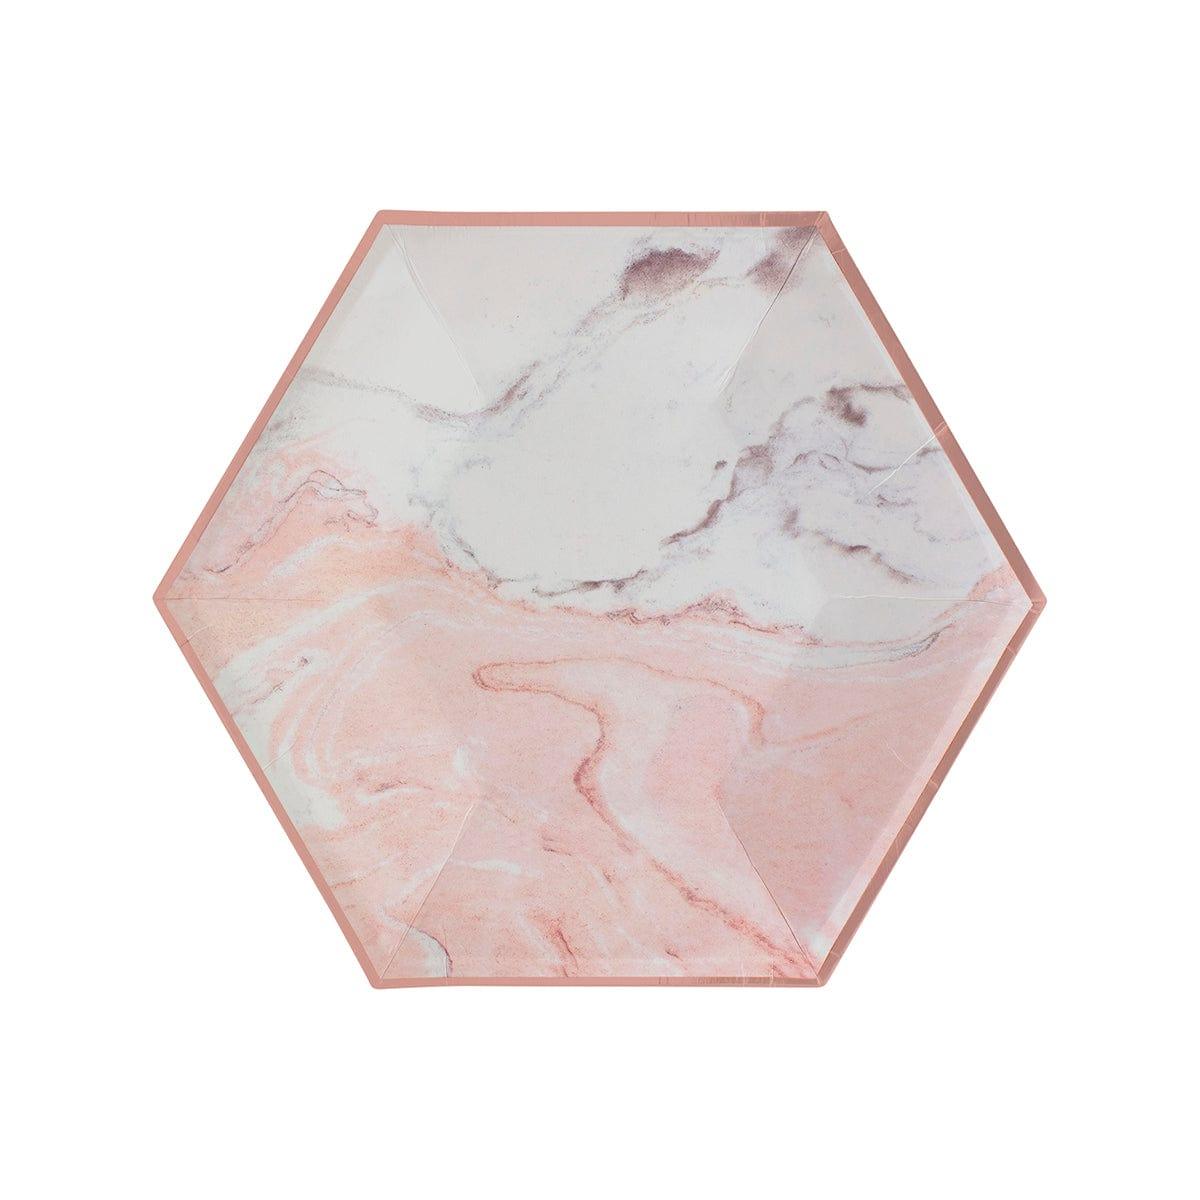 YIWU SANDY PAPER PRODUCTS CO., LTD Everyday Entertaining Rose Gold Decagon Plates, 9 Inches, 8 Count